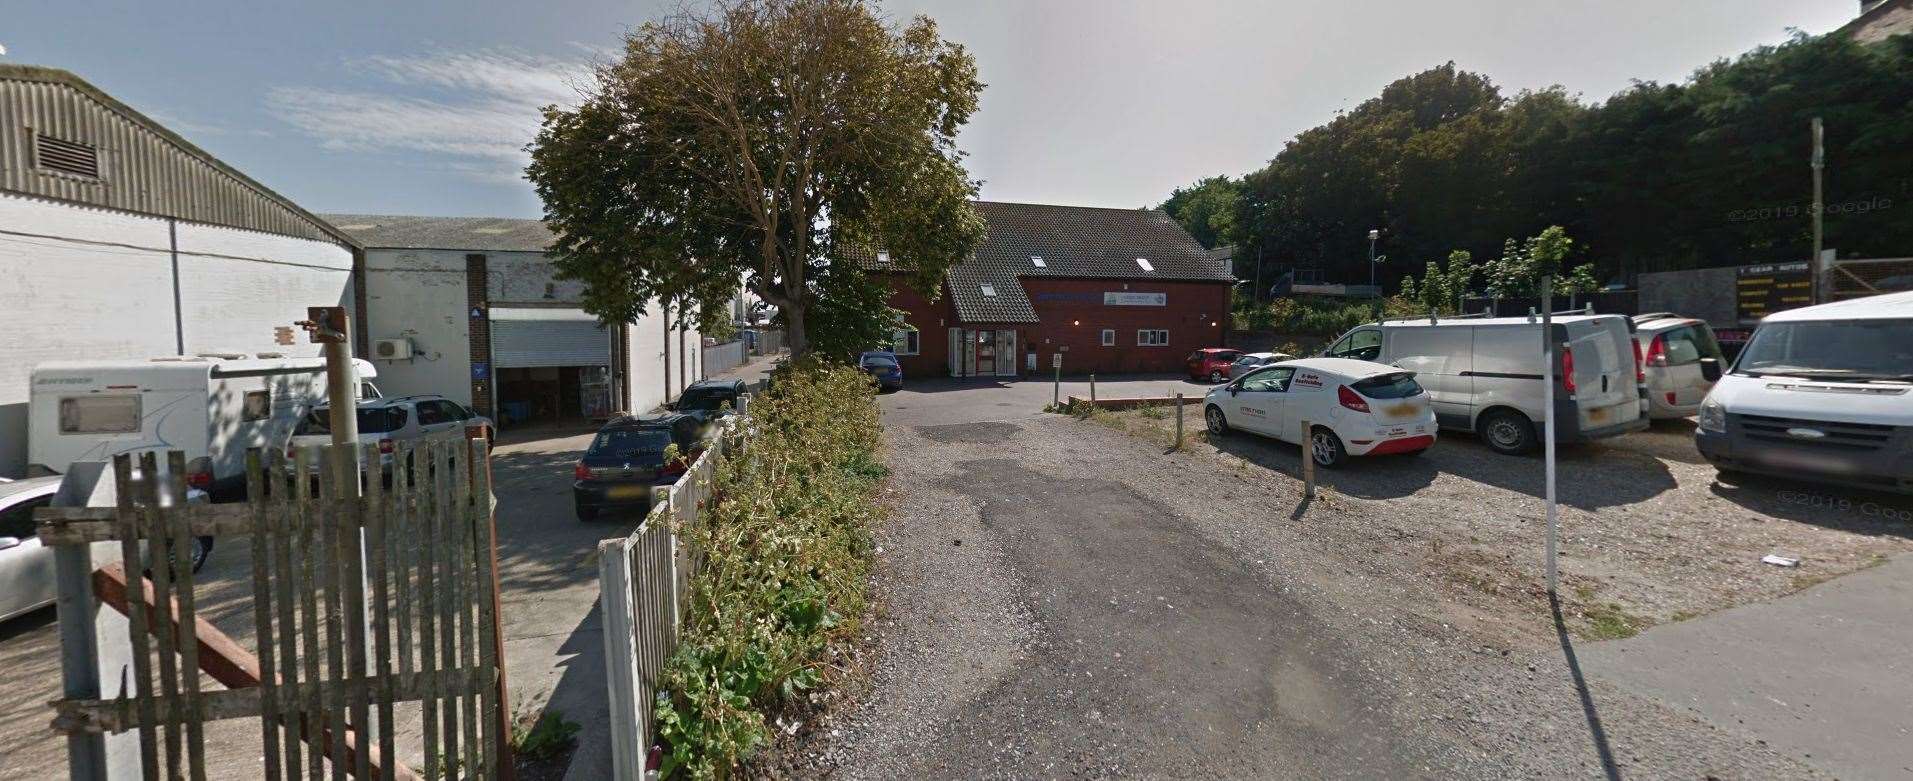 Seashore Pre-School, in Crown Score, Seashore House, Lowestoft, which has ceased operations after the liquidation of Alpha Nurseries. Picture: Google Maps